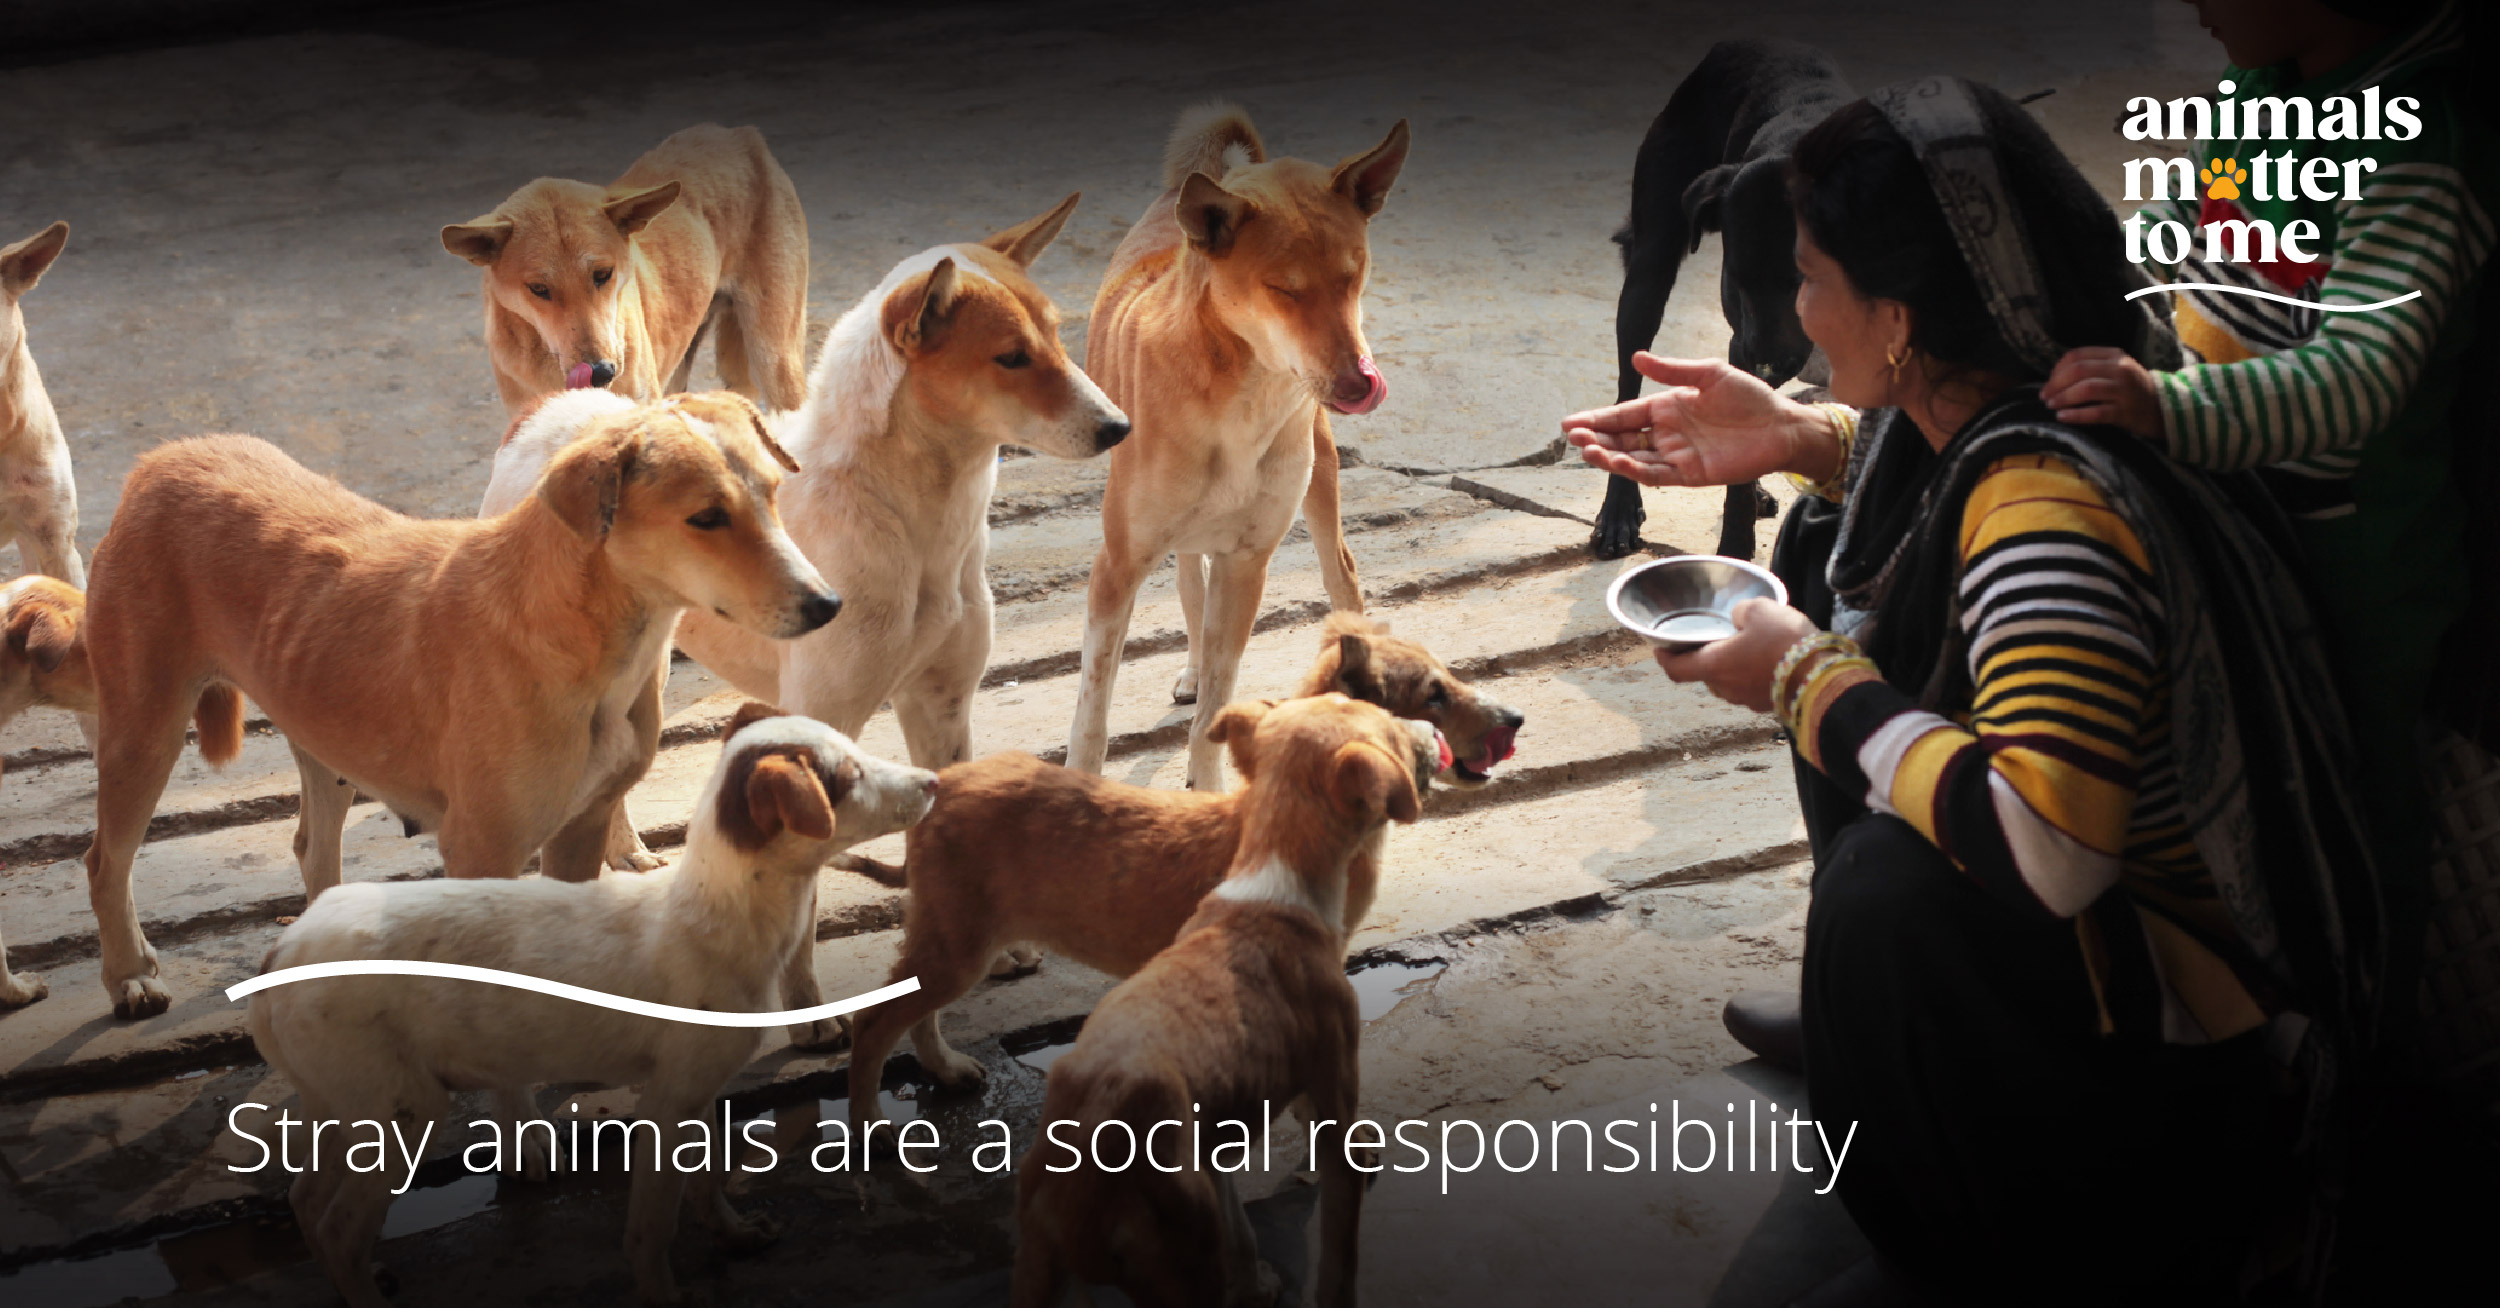 Stray animals are a social responsibility